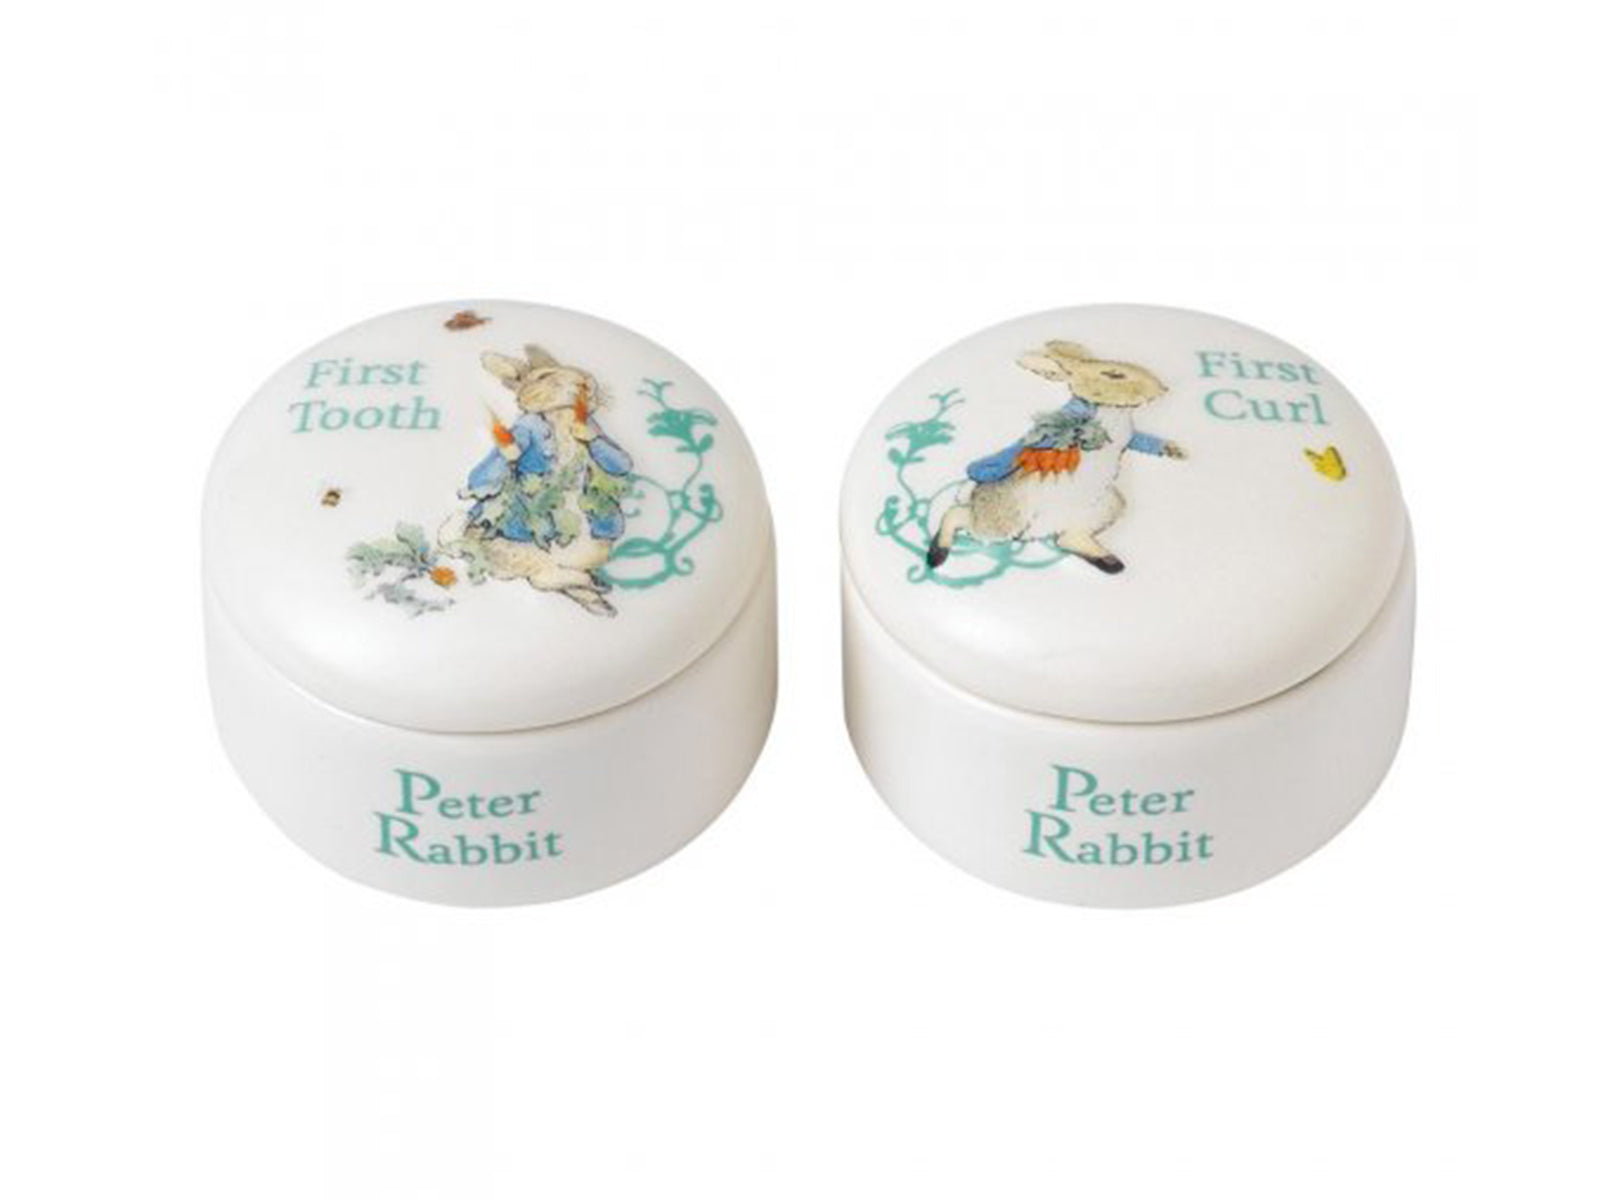 A pair of round porcelain trinket dishes with blue writing and a small brown rabbit wearing a blue jacket decorating the outside.